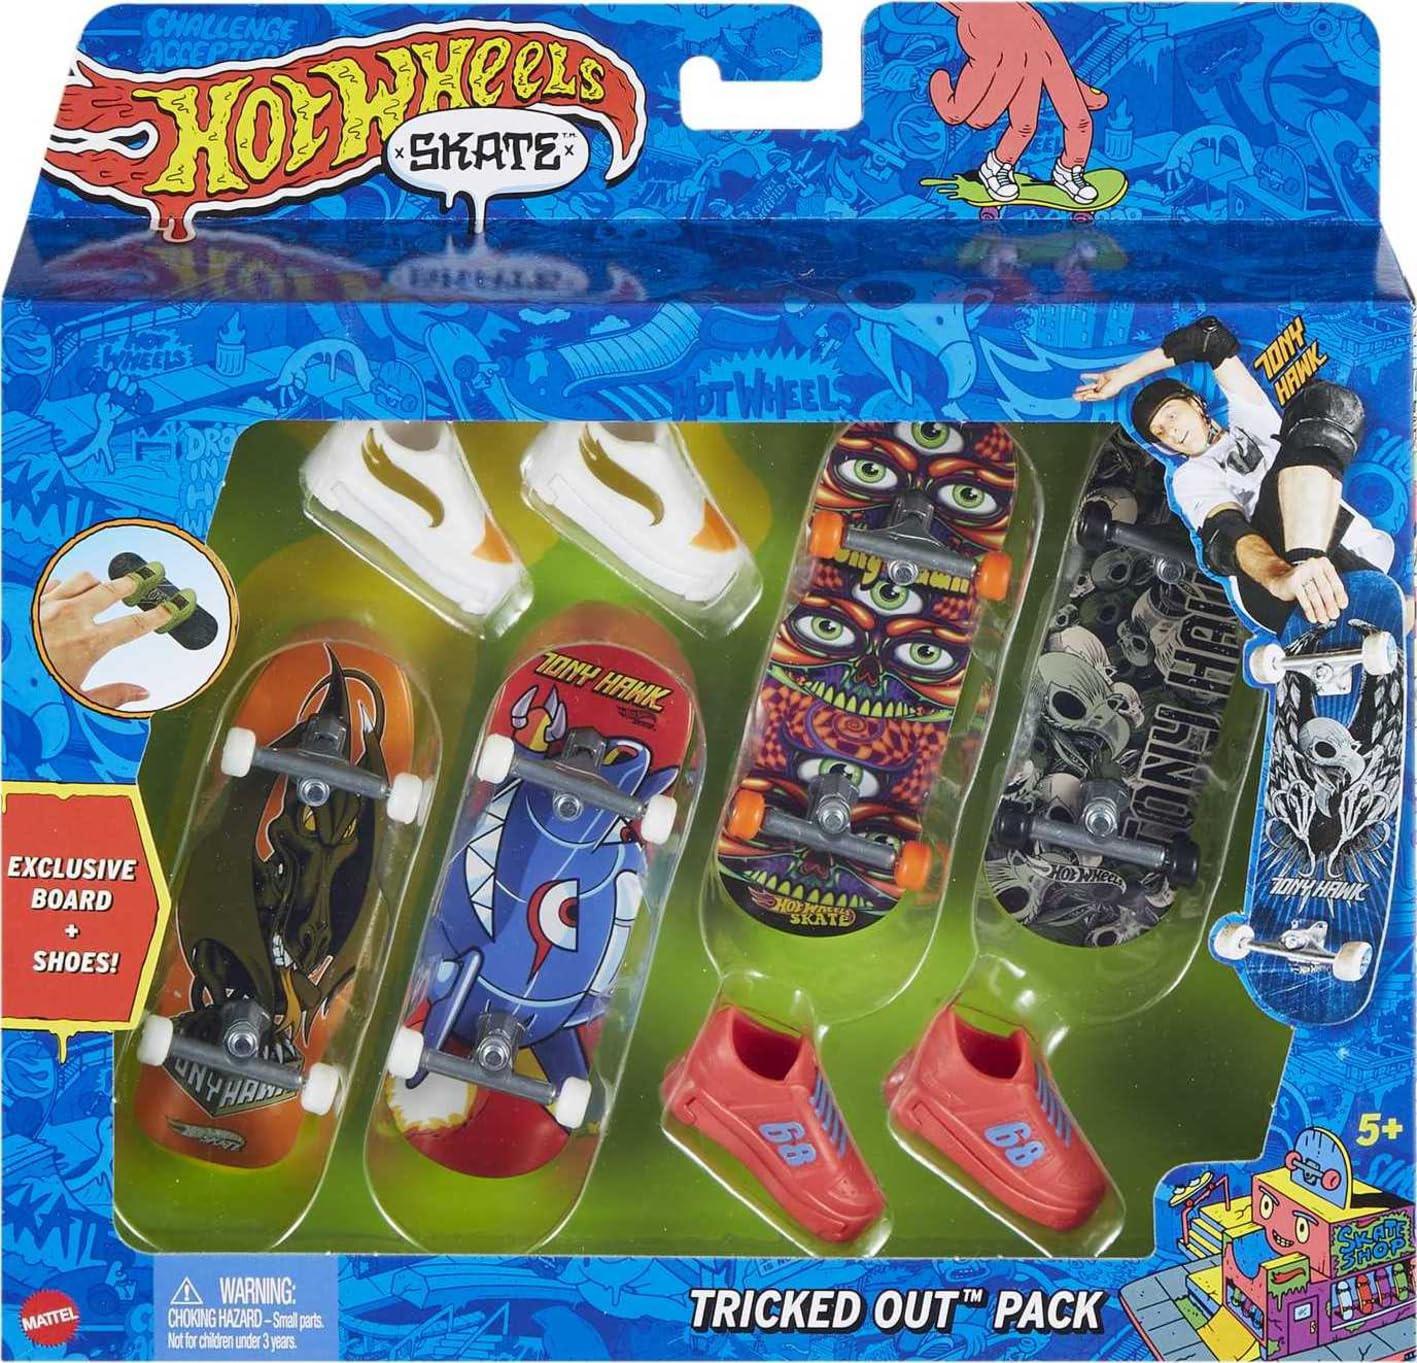 hot wheels skate tricked out pack, 4 tony hawk-themed fingerboards & 2 pairs of skate shoes, includes 1 exclusive set (styles